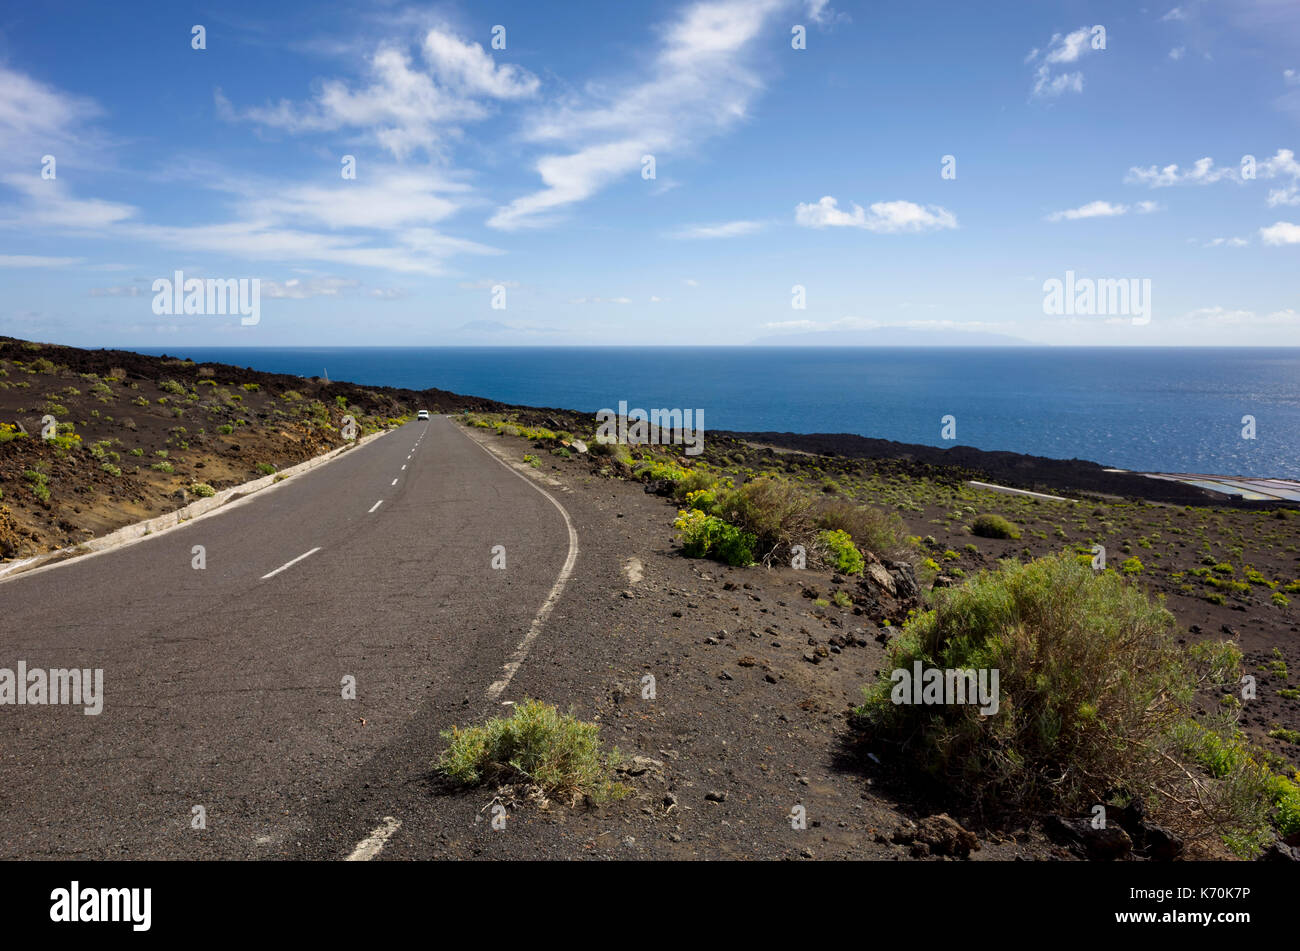 LP-130 highway, Salinas de Fuencaliente, La Palma.  A view of the coastal road, close to sea level, where it comes to the tourist attractions of the two light houses and sea salt pans. A little vegetation grows along the road side.  Lava rocks form the coastline and a beautiful deep blue sea can be seen to the horizon against a blue sky with light fluffy clouds.  The neighbouring island is just about visible on the horizon. Stock Photo